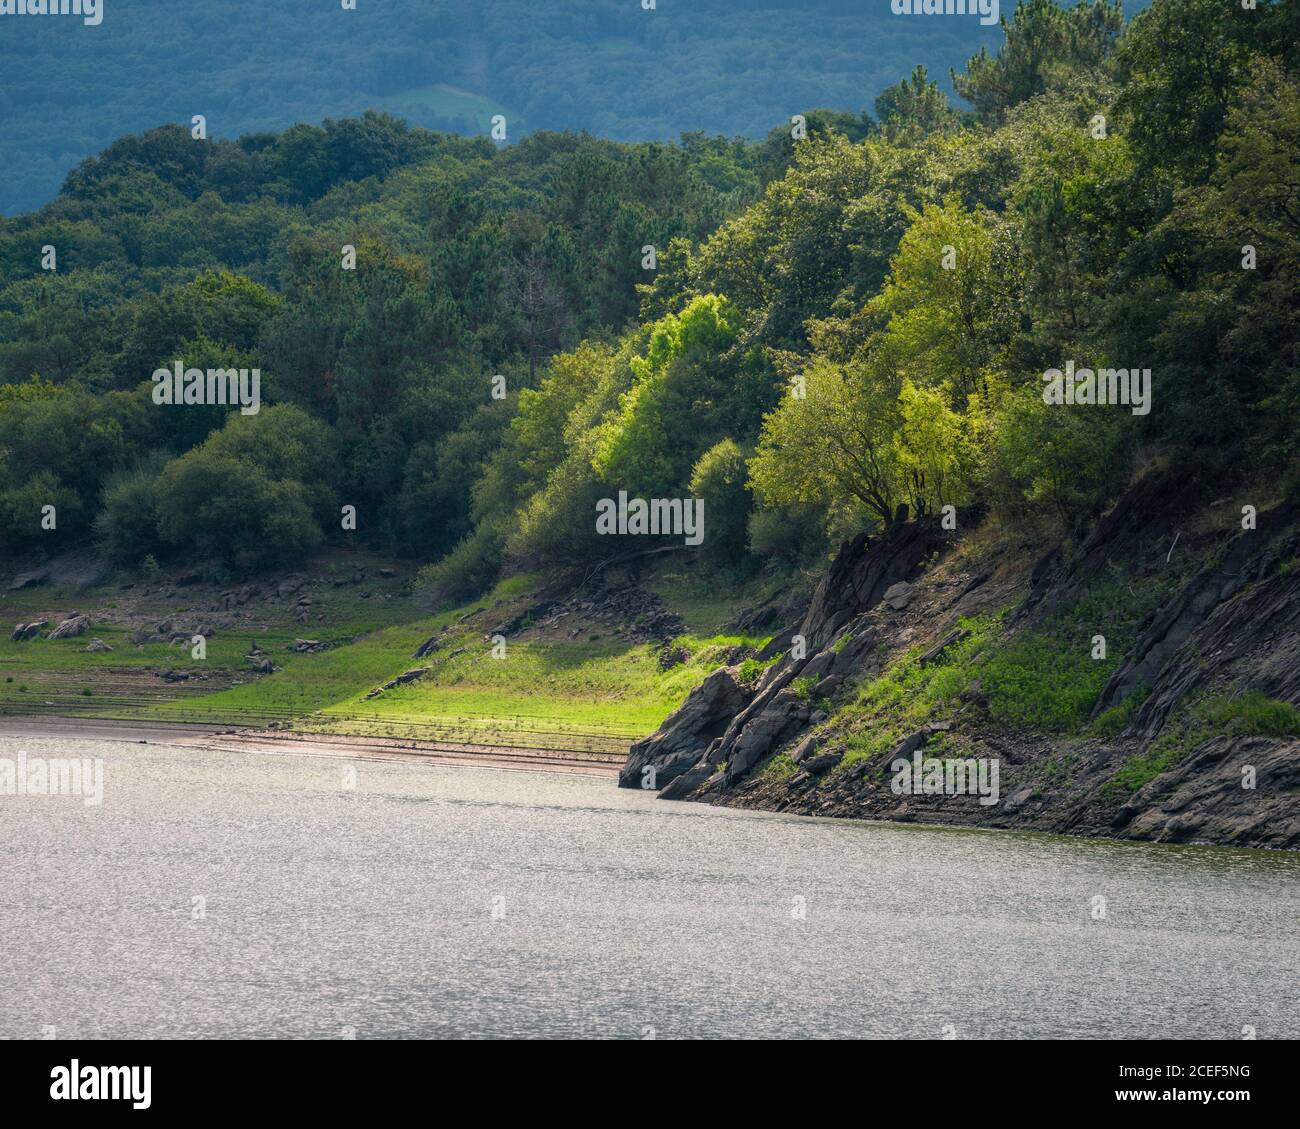 A ray of sunlight illuminates a portion of forest on the bank of a great river Stock Photo